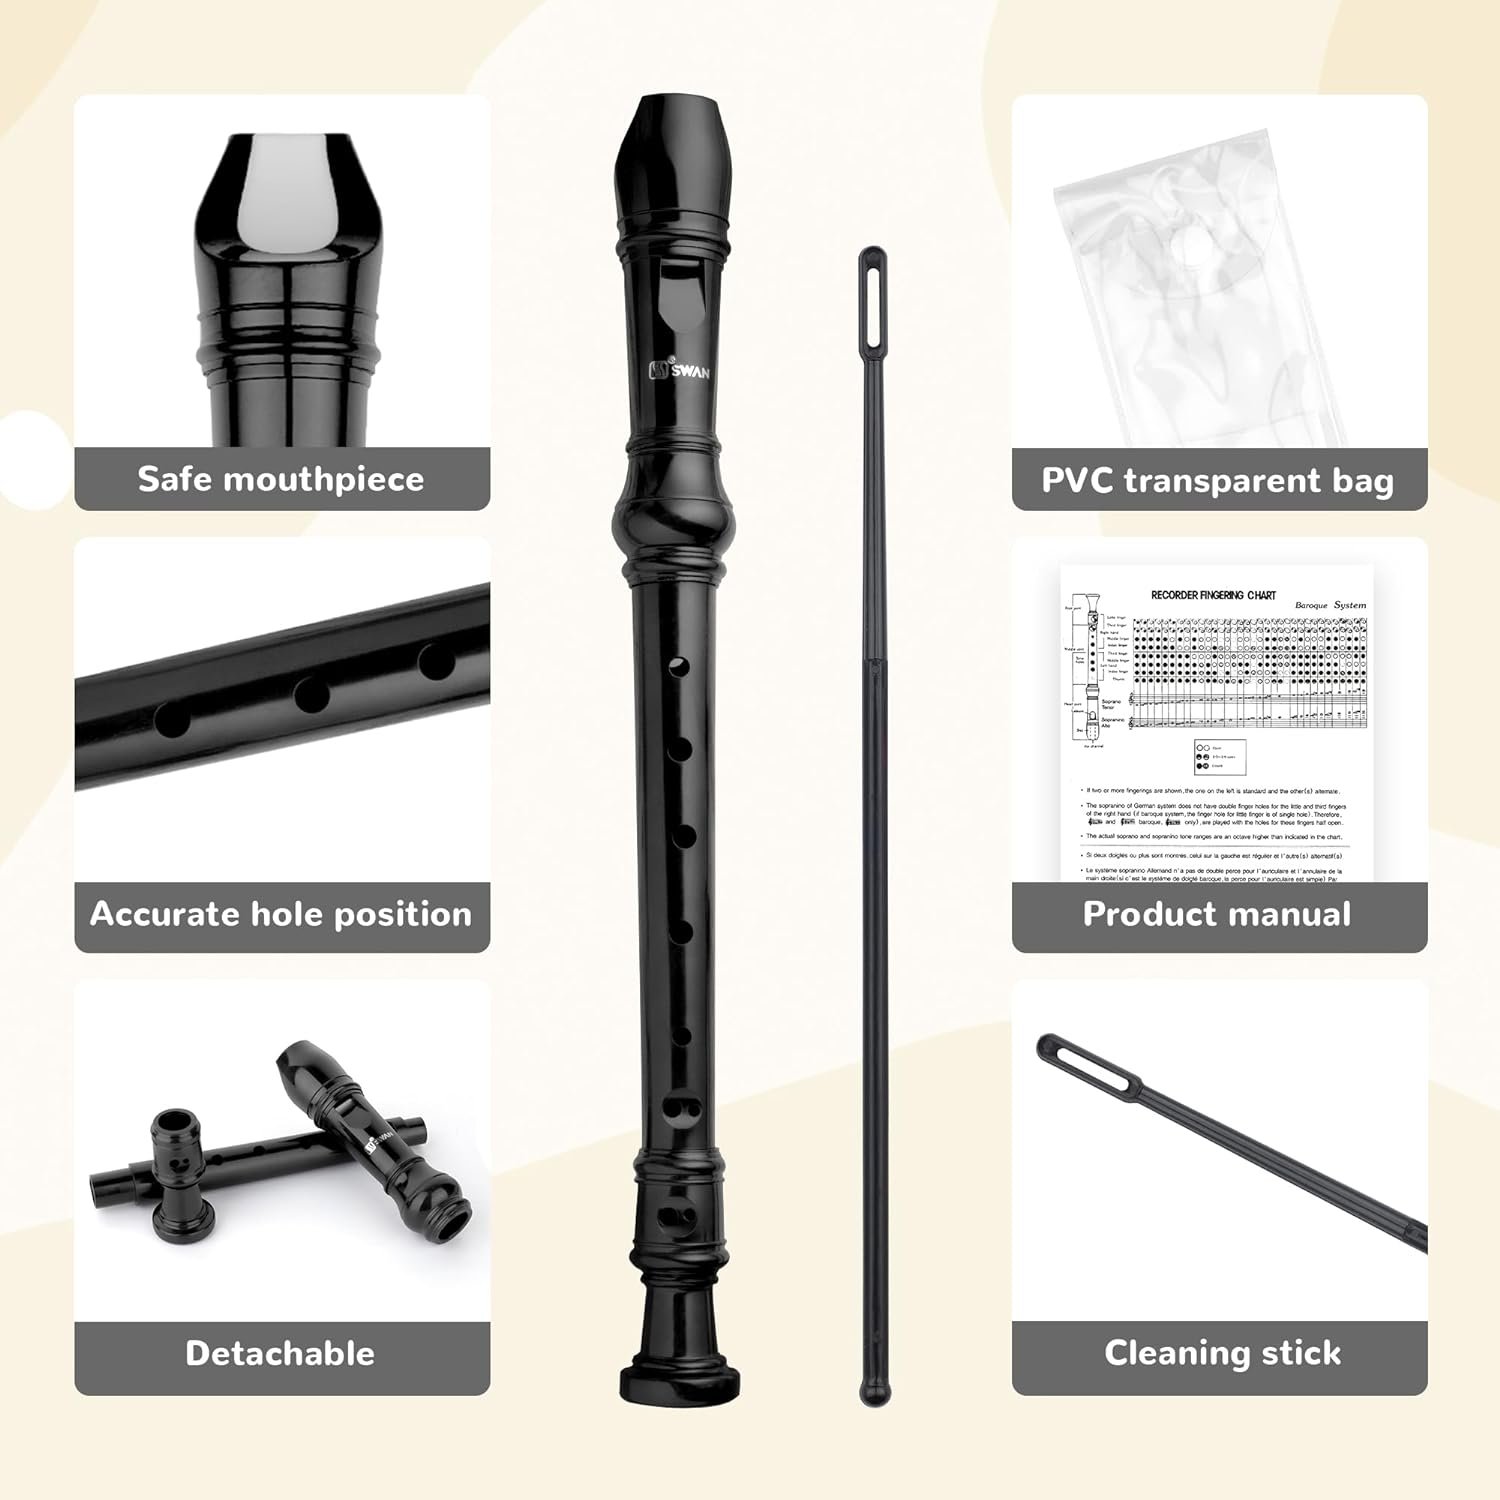 SWAN Soprano Recorder Instrument for Beginners Kids Student in School - German Fingering 8 Hole Flute 3pcs ABS Descant Recorders with Cleaning Rod and Fingering Chart, SW8K Black